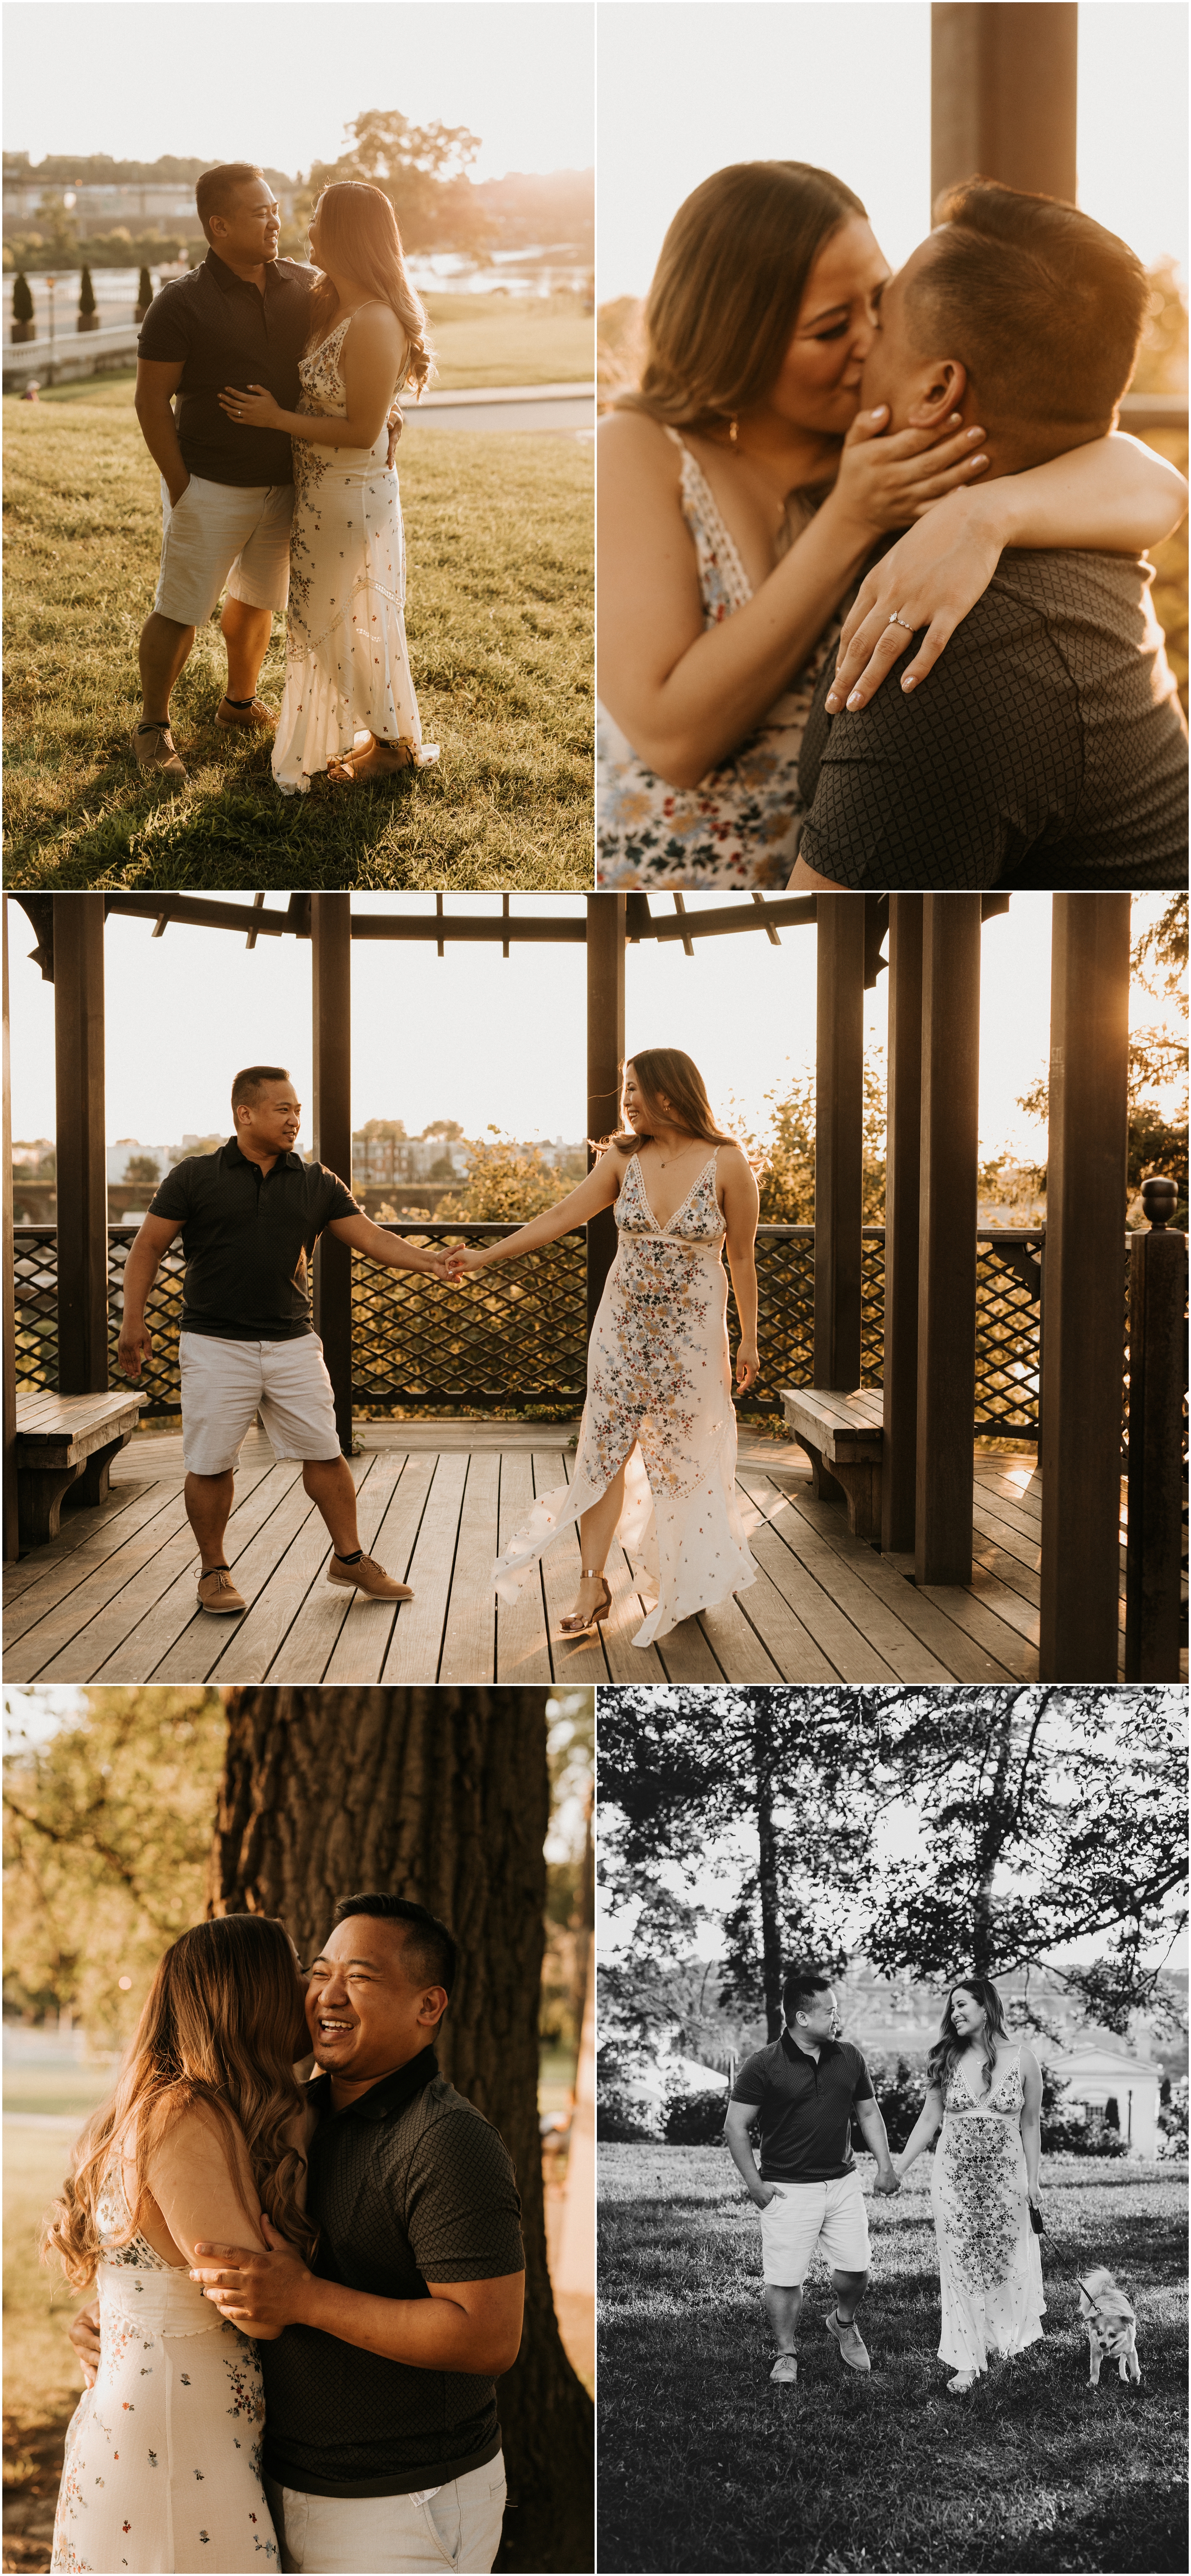 couple dancing in park at sunset